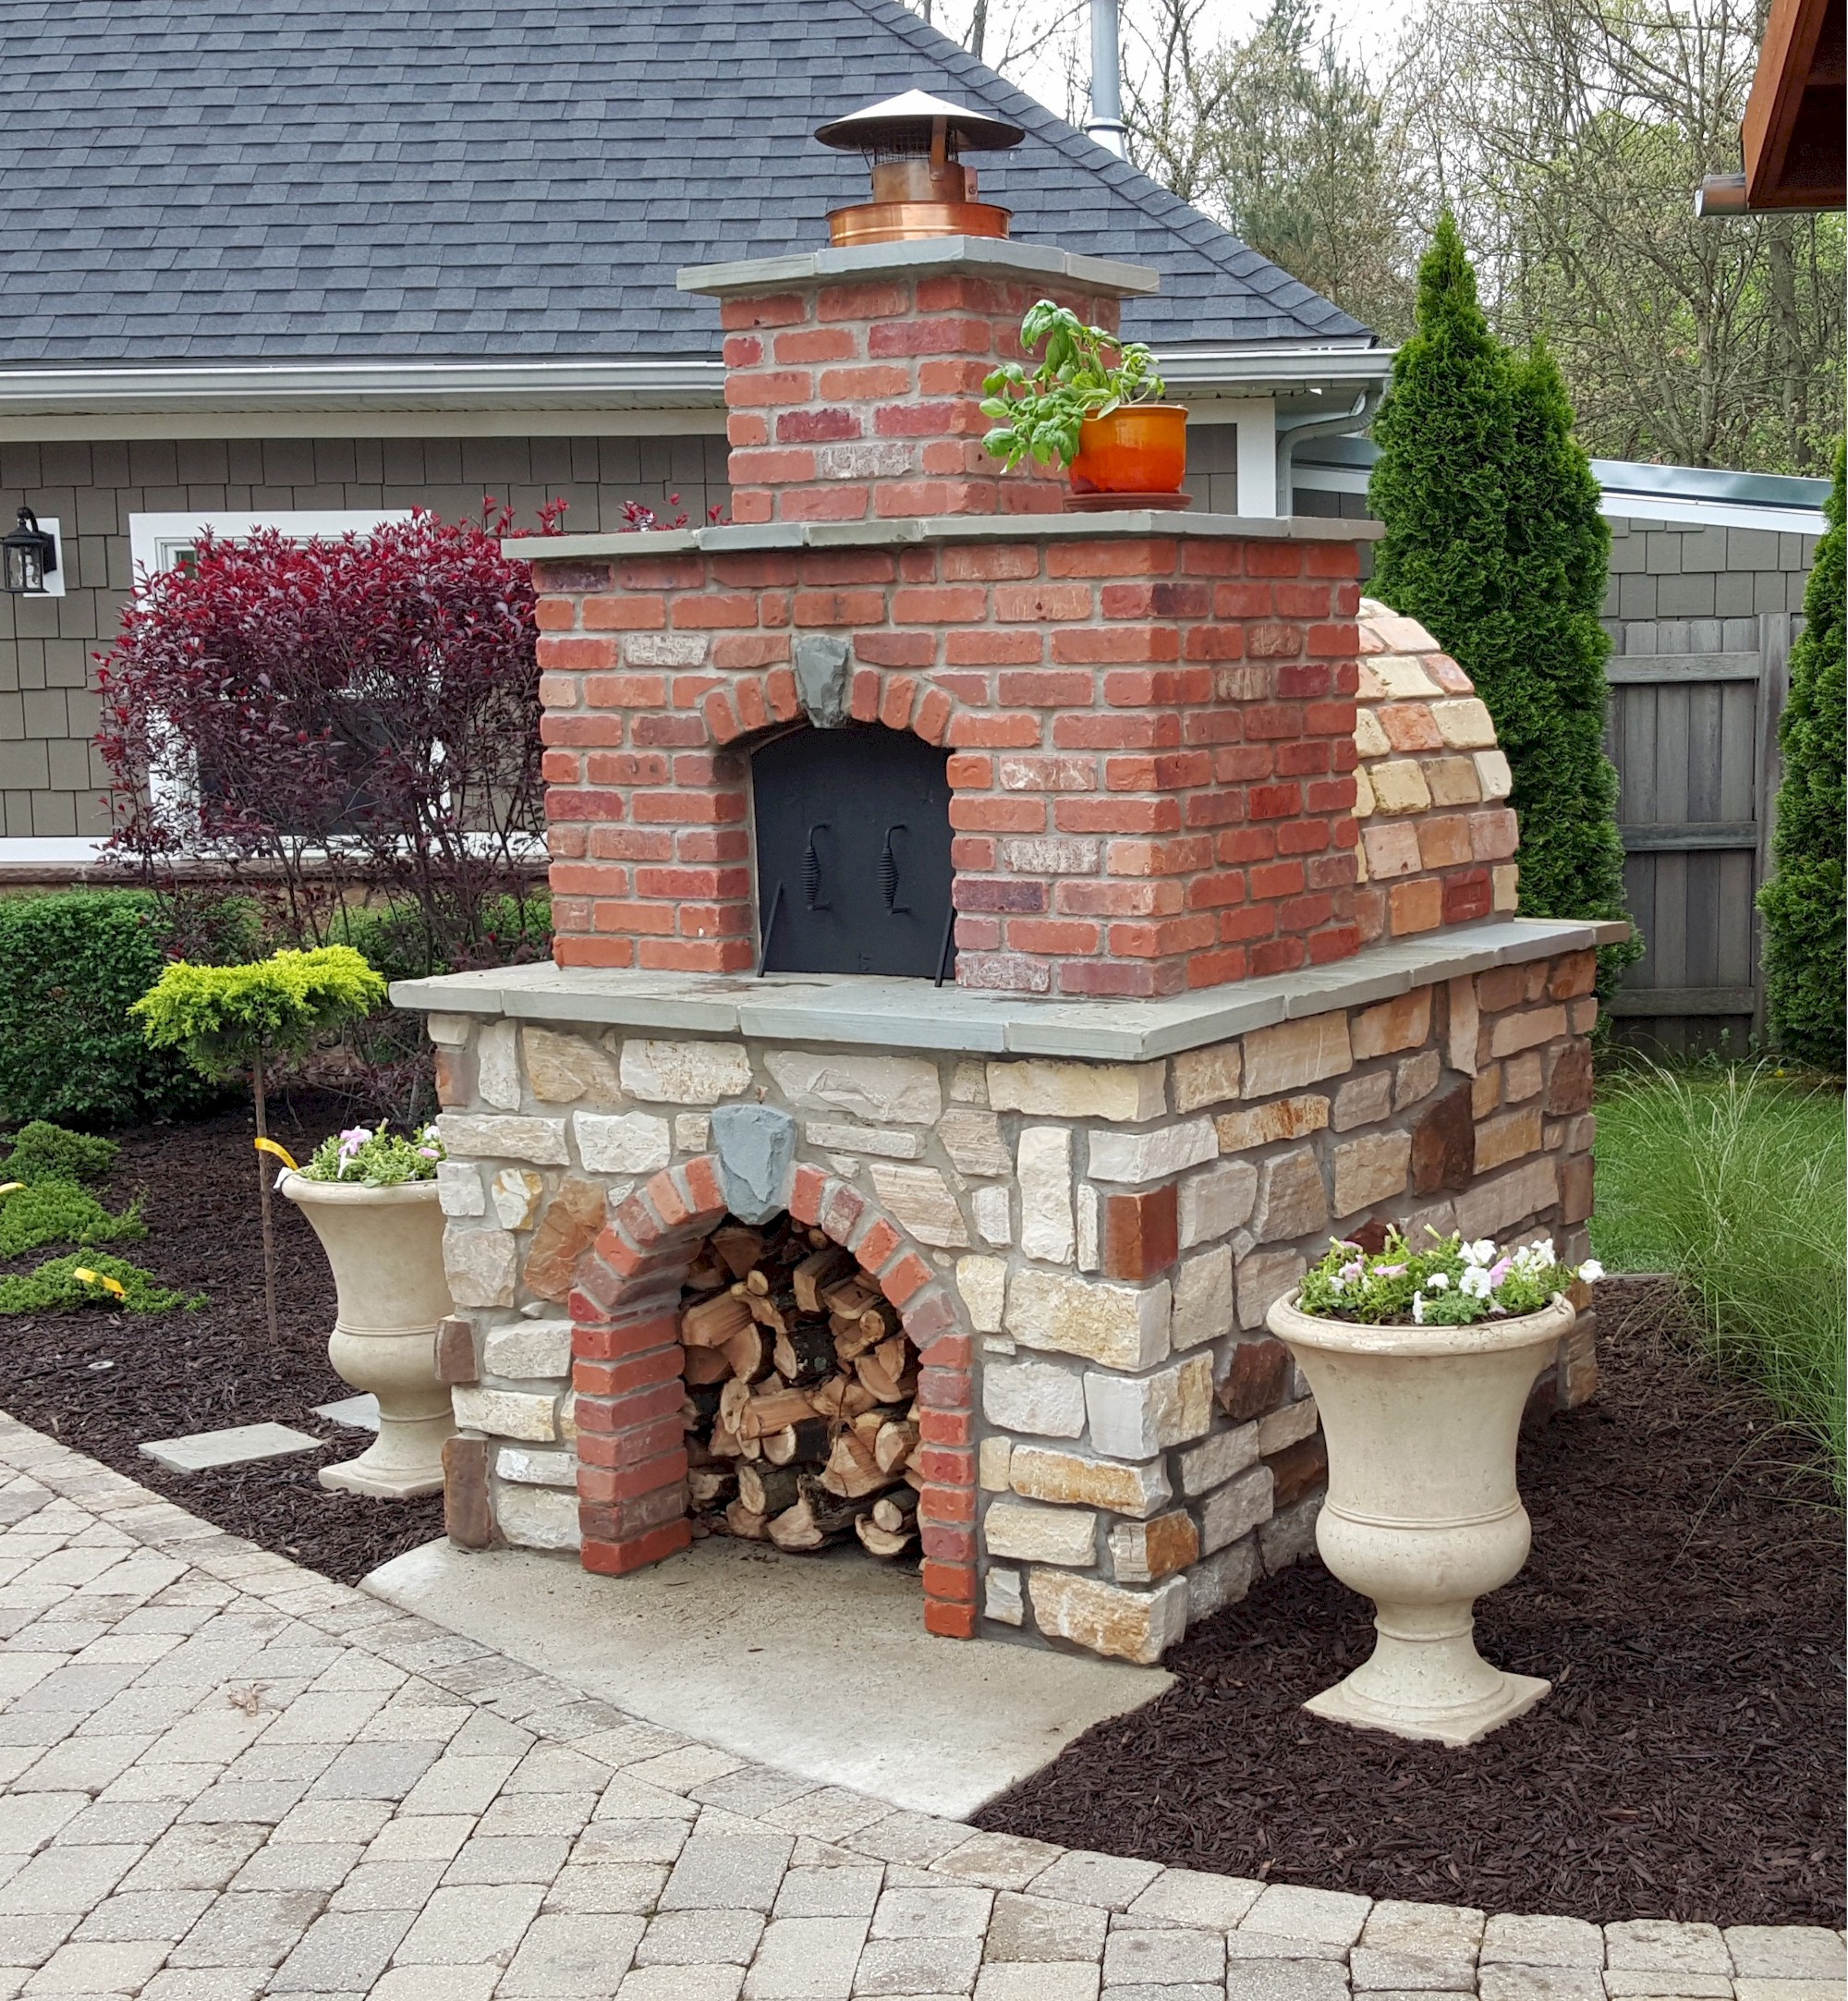 Outdoor Oven DIY
 DIY Wood Fired Outdoor Brick Pizza Ovens Are Not ly Easy